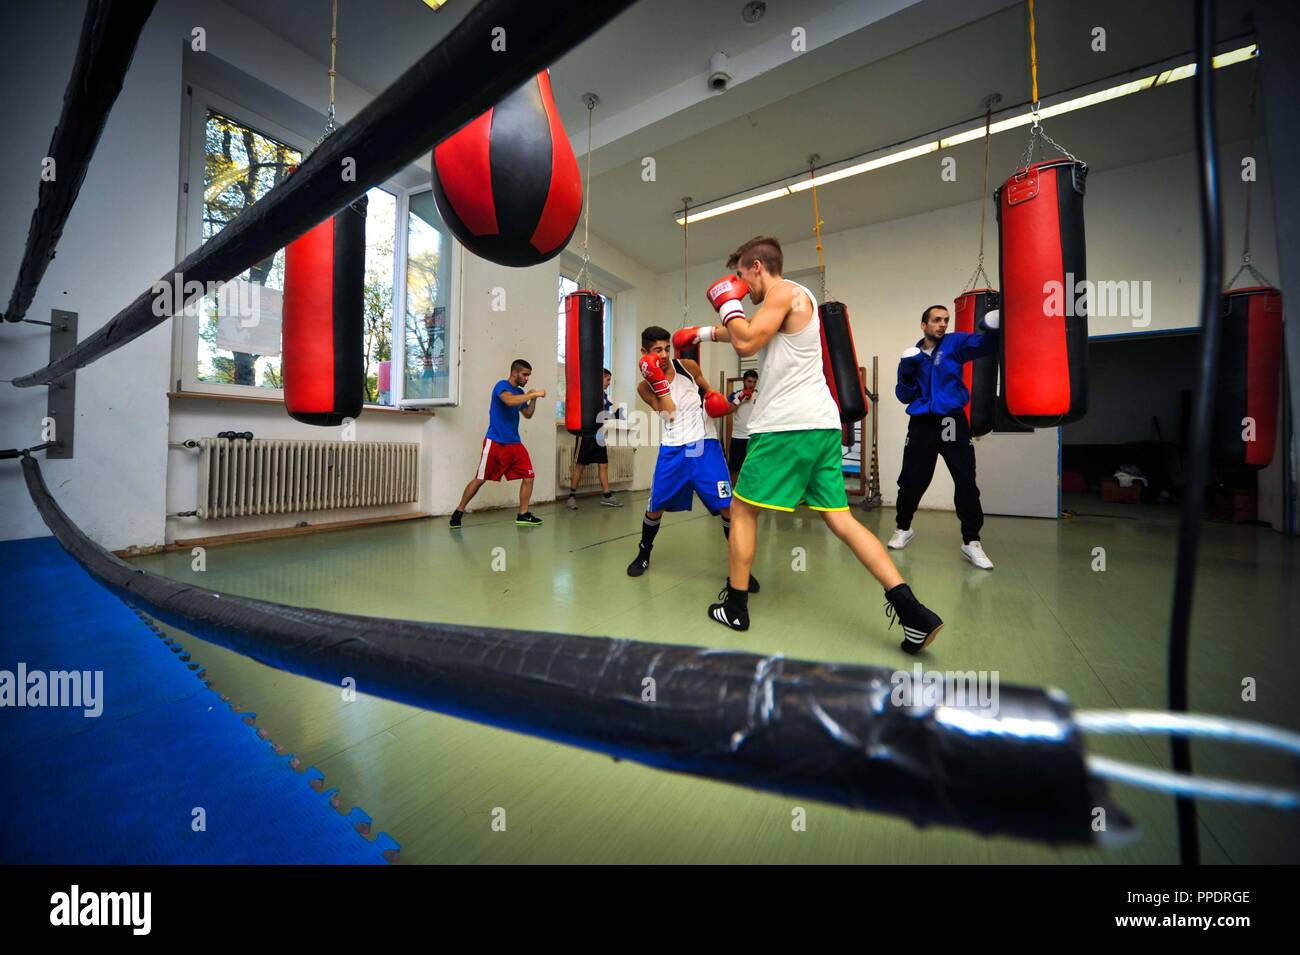 Boxing training of TSV 1860 Muenchen in the sports hall of the Wittelsbacherschule (Wittelsbach School) in the Auenstrasse 19. Stock Photo